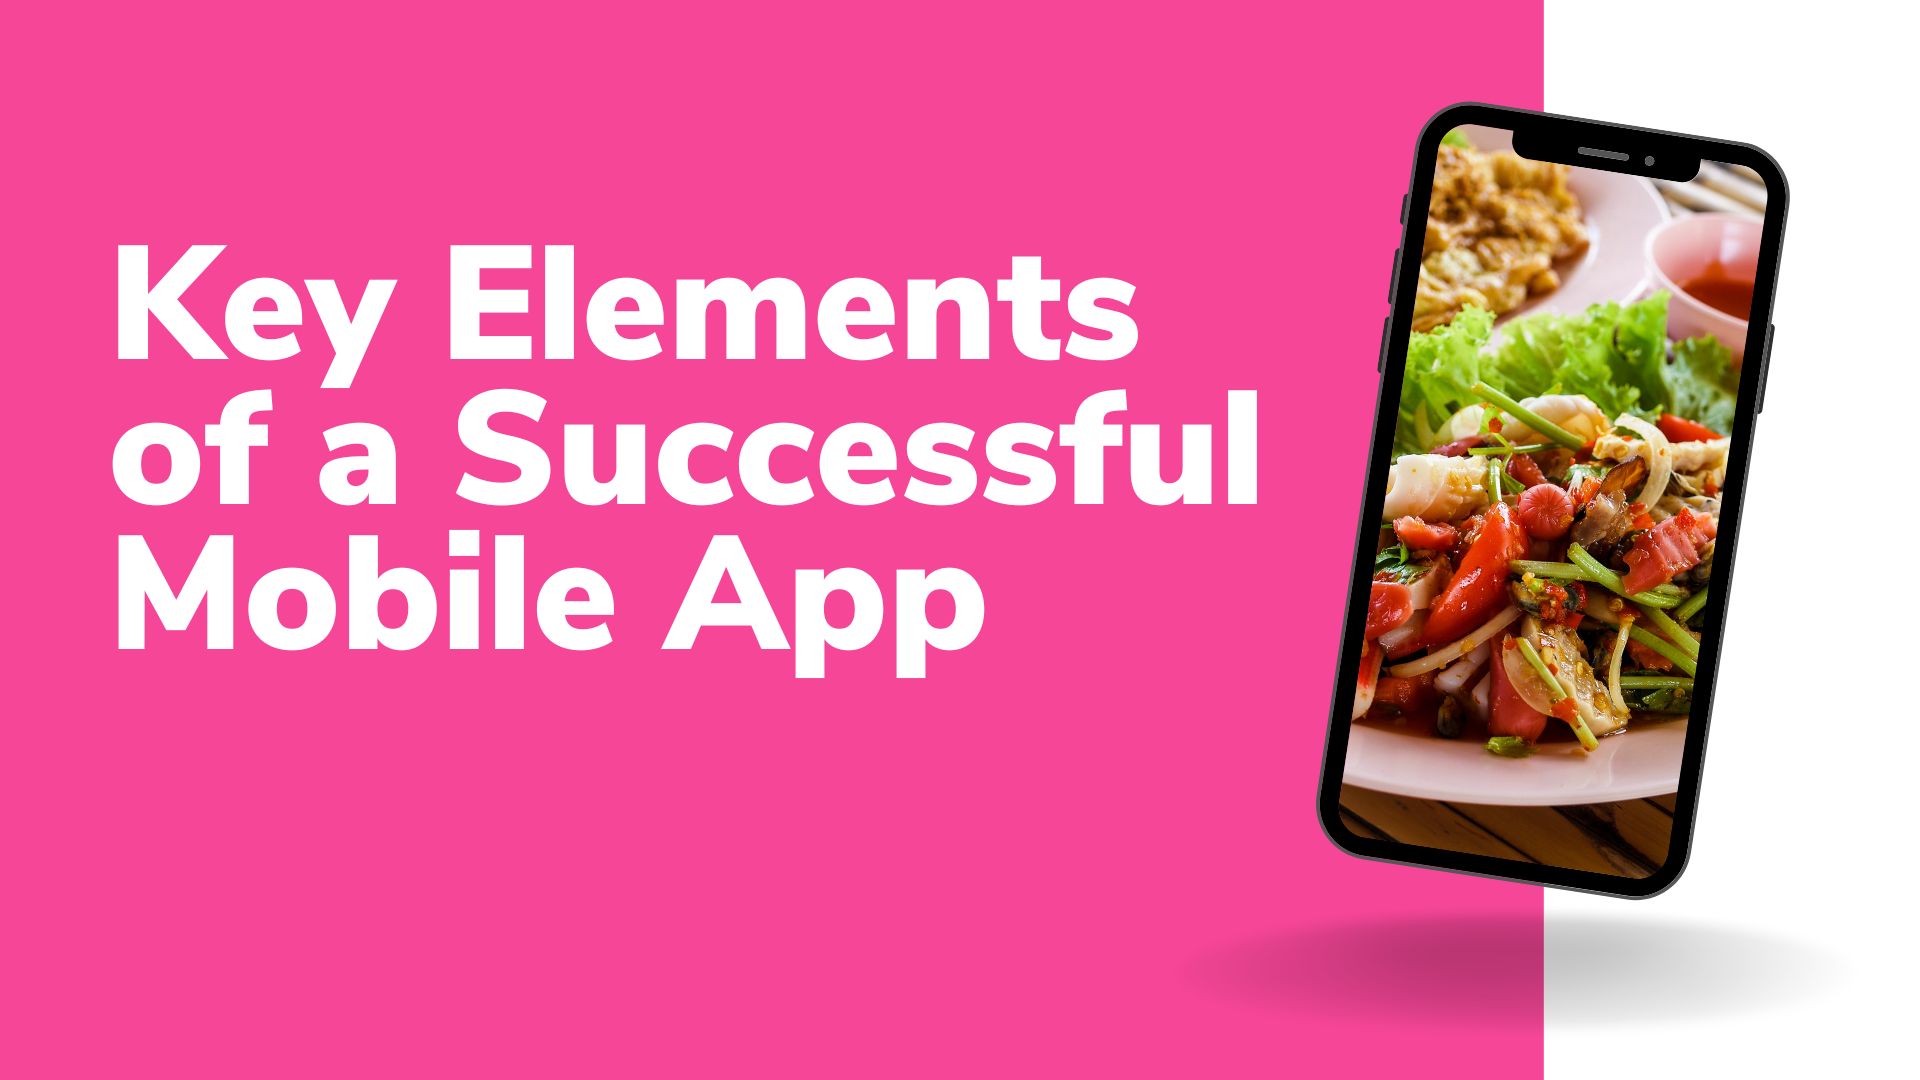 Key Elements of a Successful Mobile App